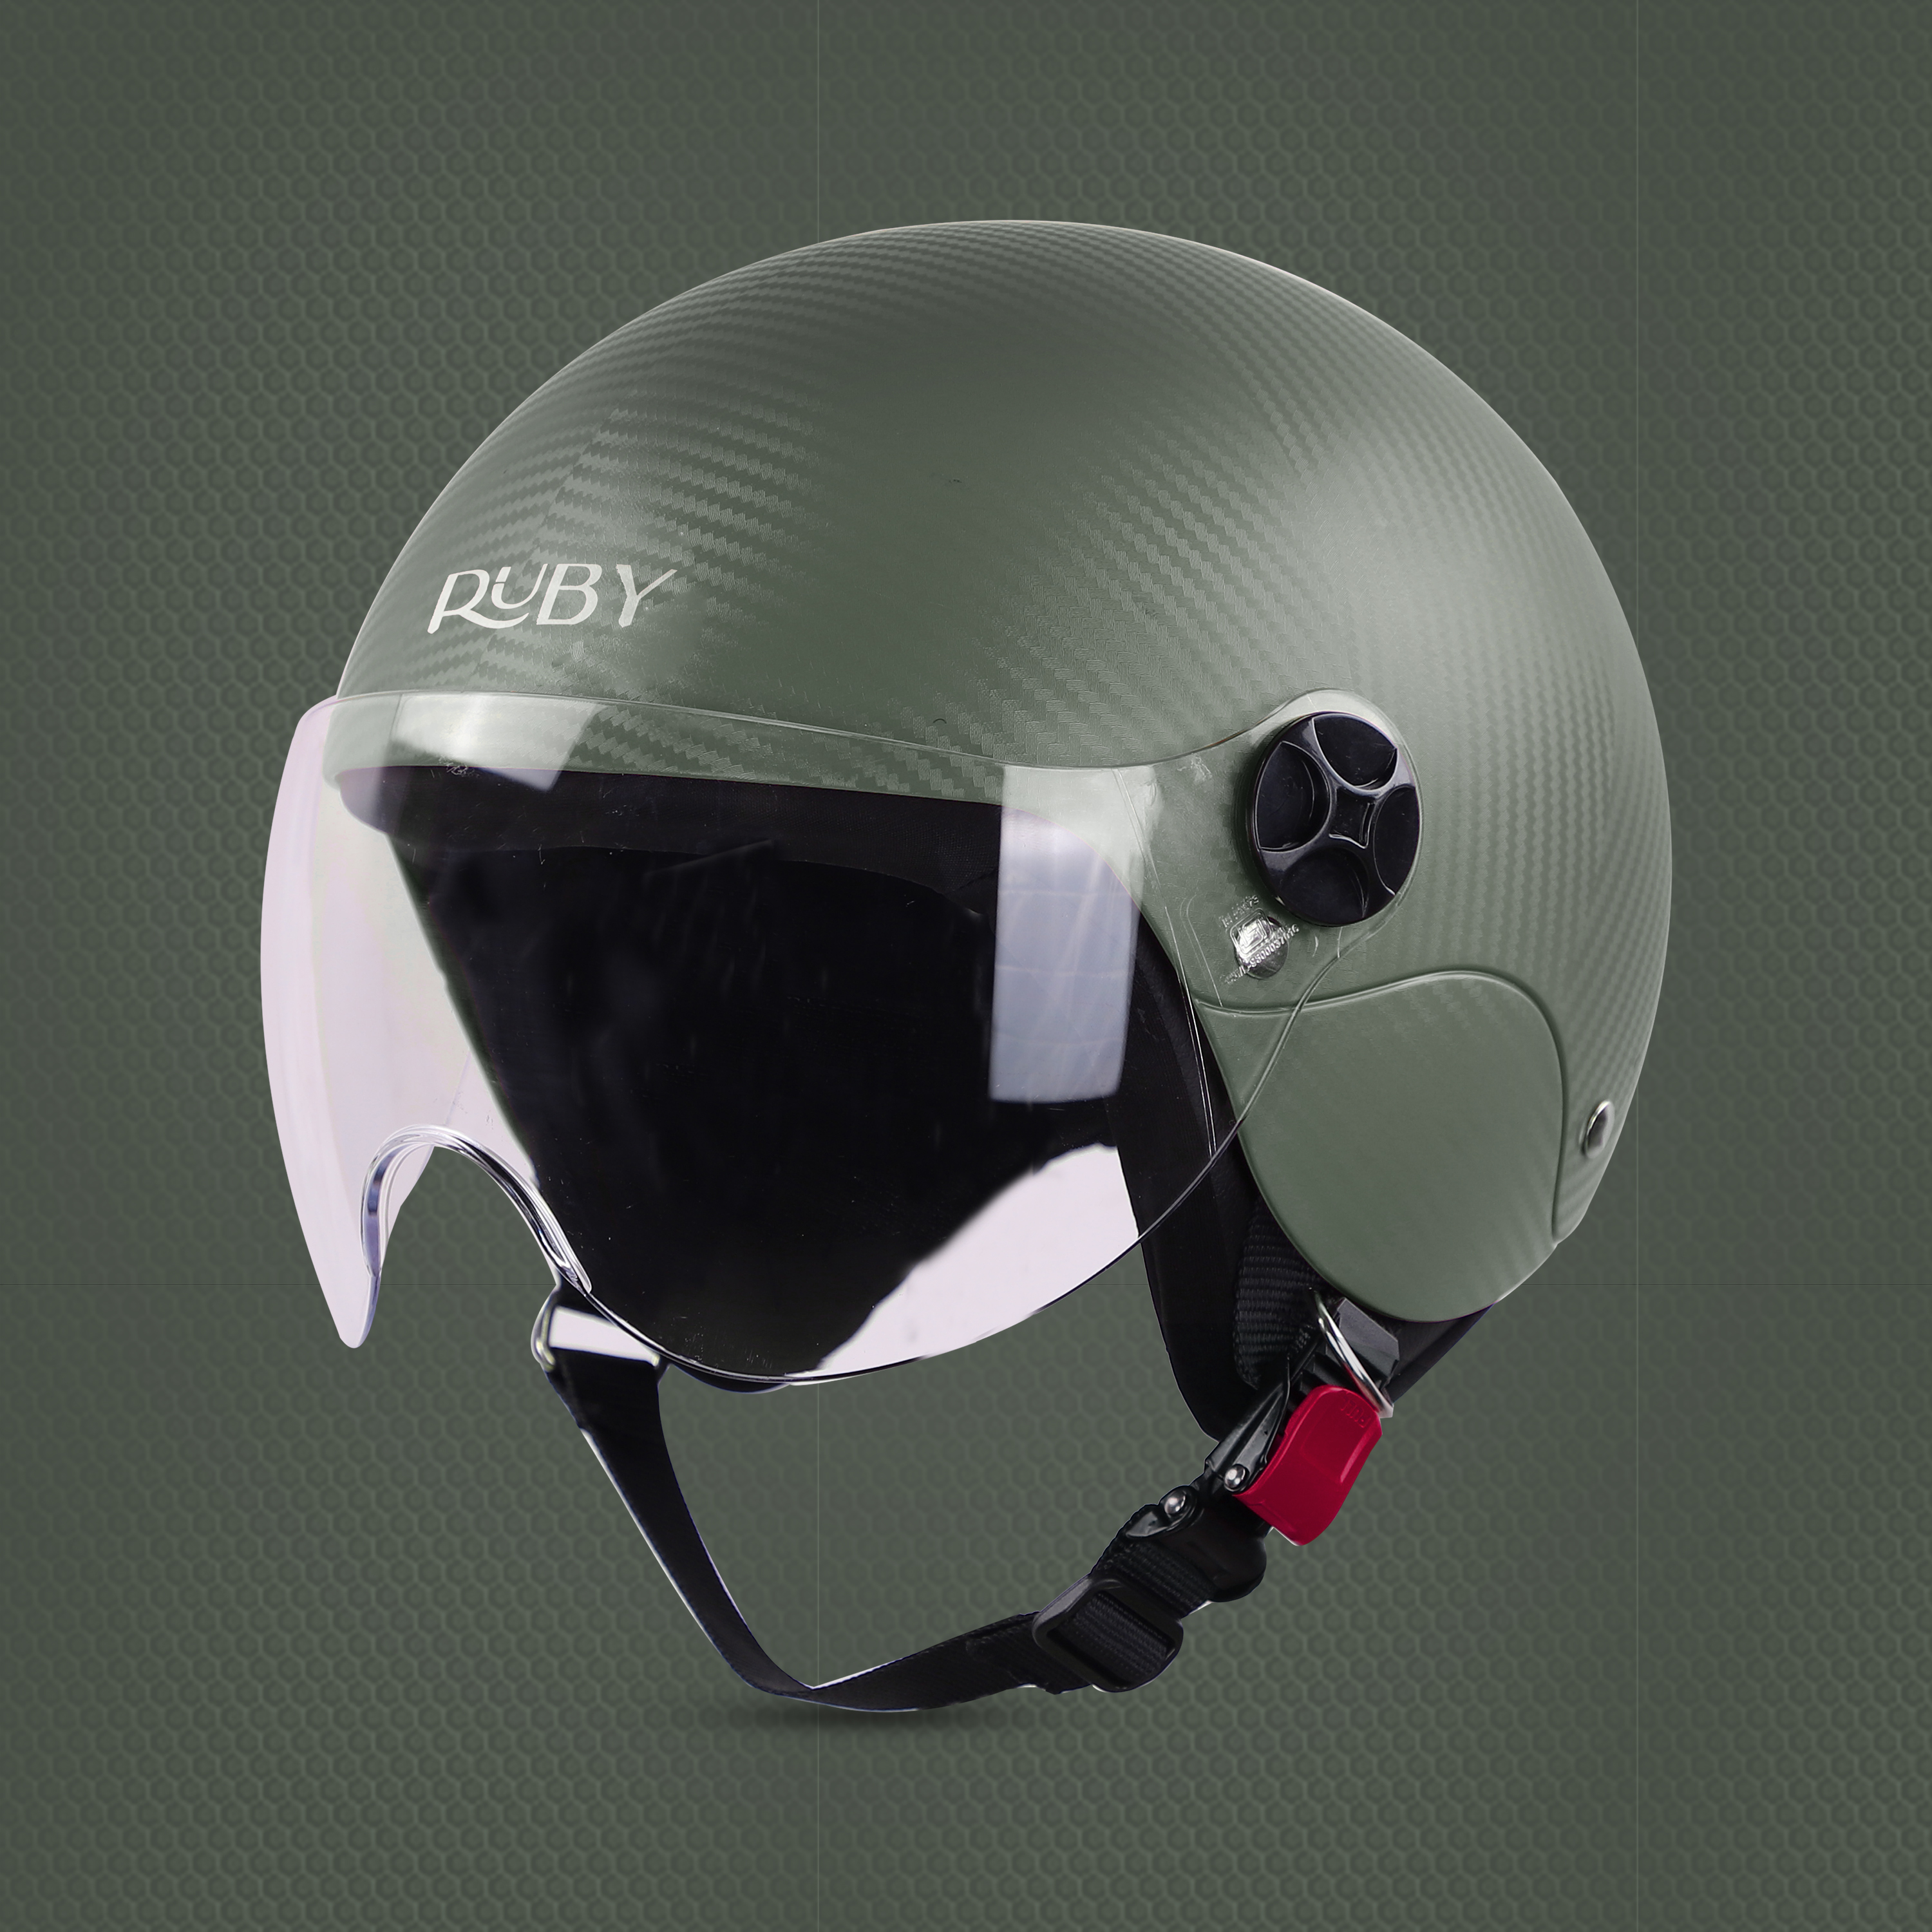 Steelbird SBH-16 Ruby ISI Certified Open Face Helmet (Dashing Battle Green With Clear Visor)